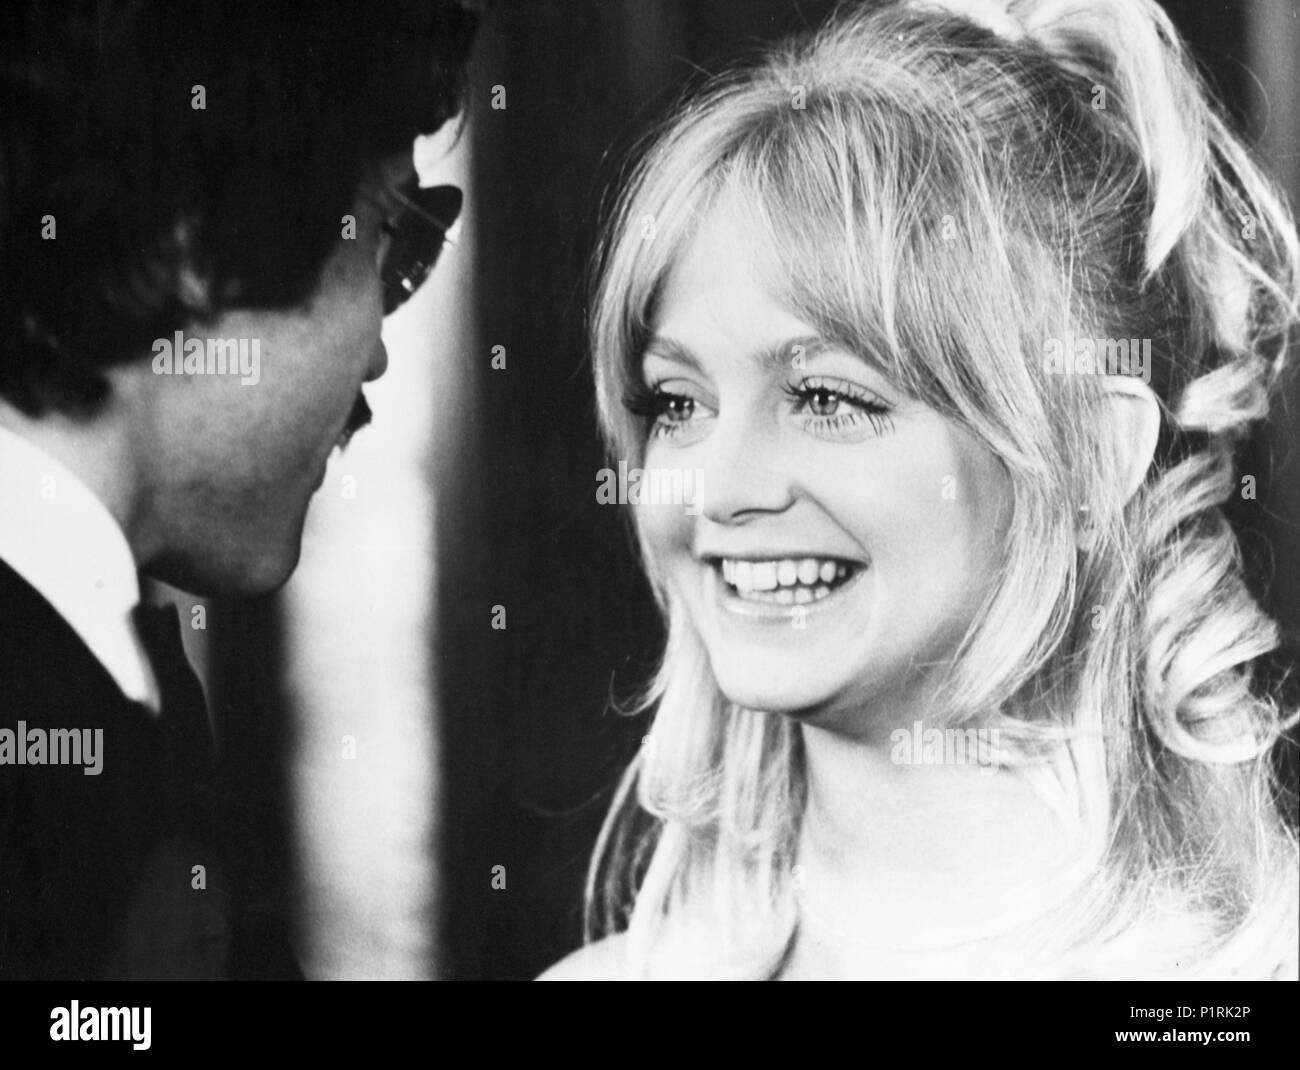 Original Film Title: SHAMPOO.  English Title: SHAMPOO.  Film Director: HAL ASHBY.  Year: 1975.  Stars: GOLDIE HAWN. Credit: COLUMBIA PICTURES / Album Stock Photo